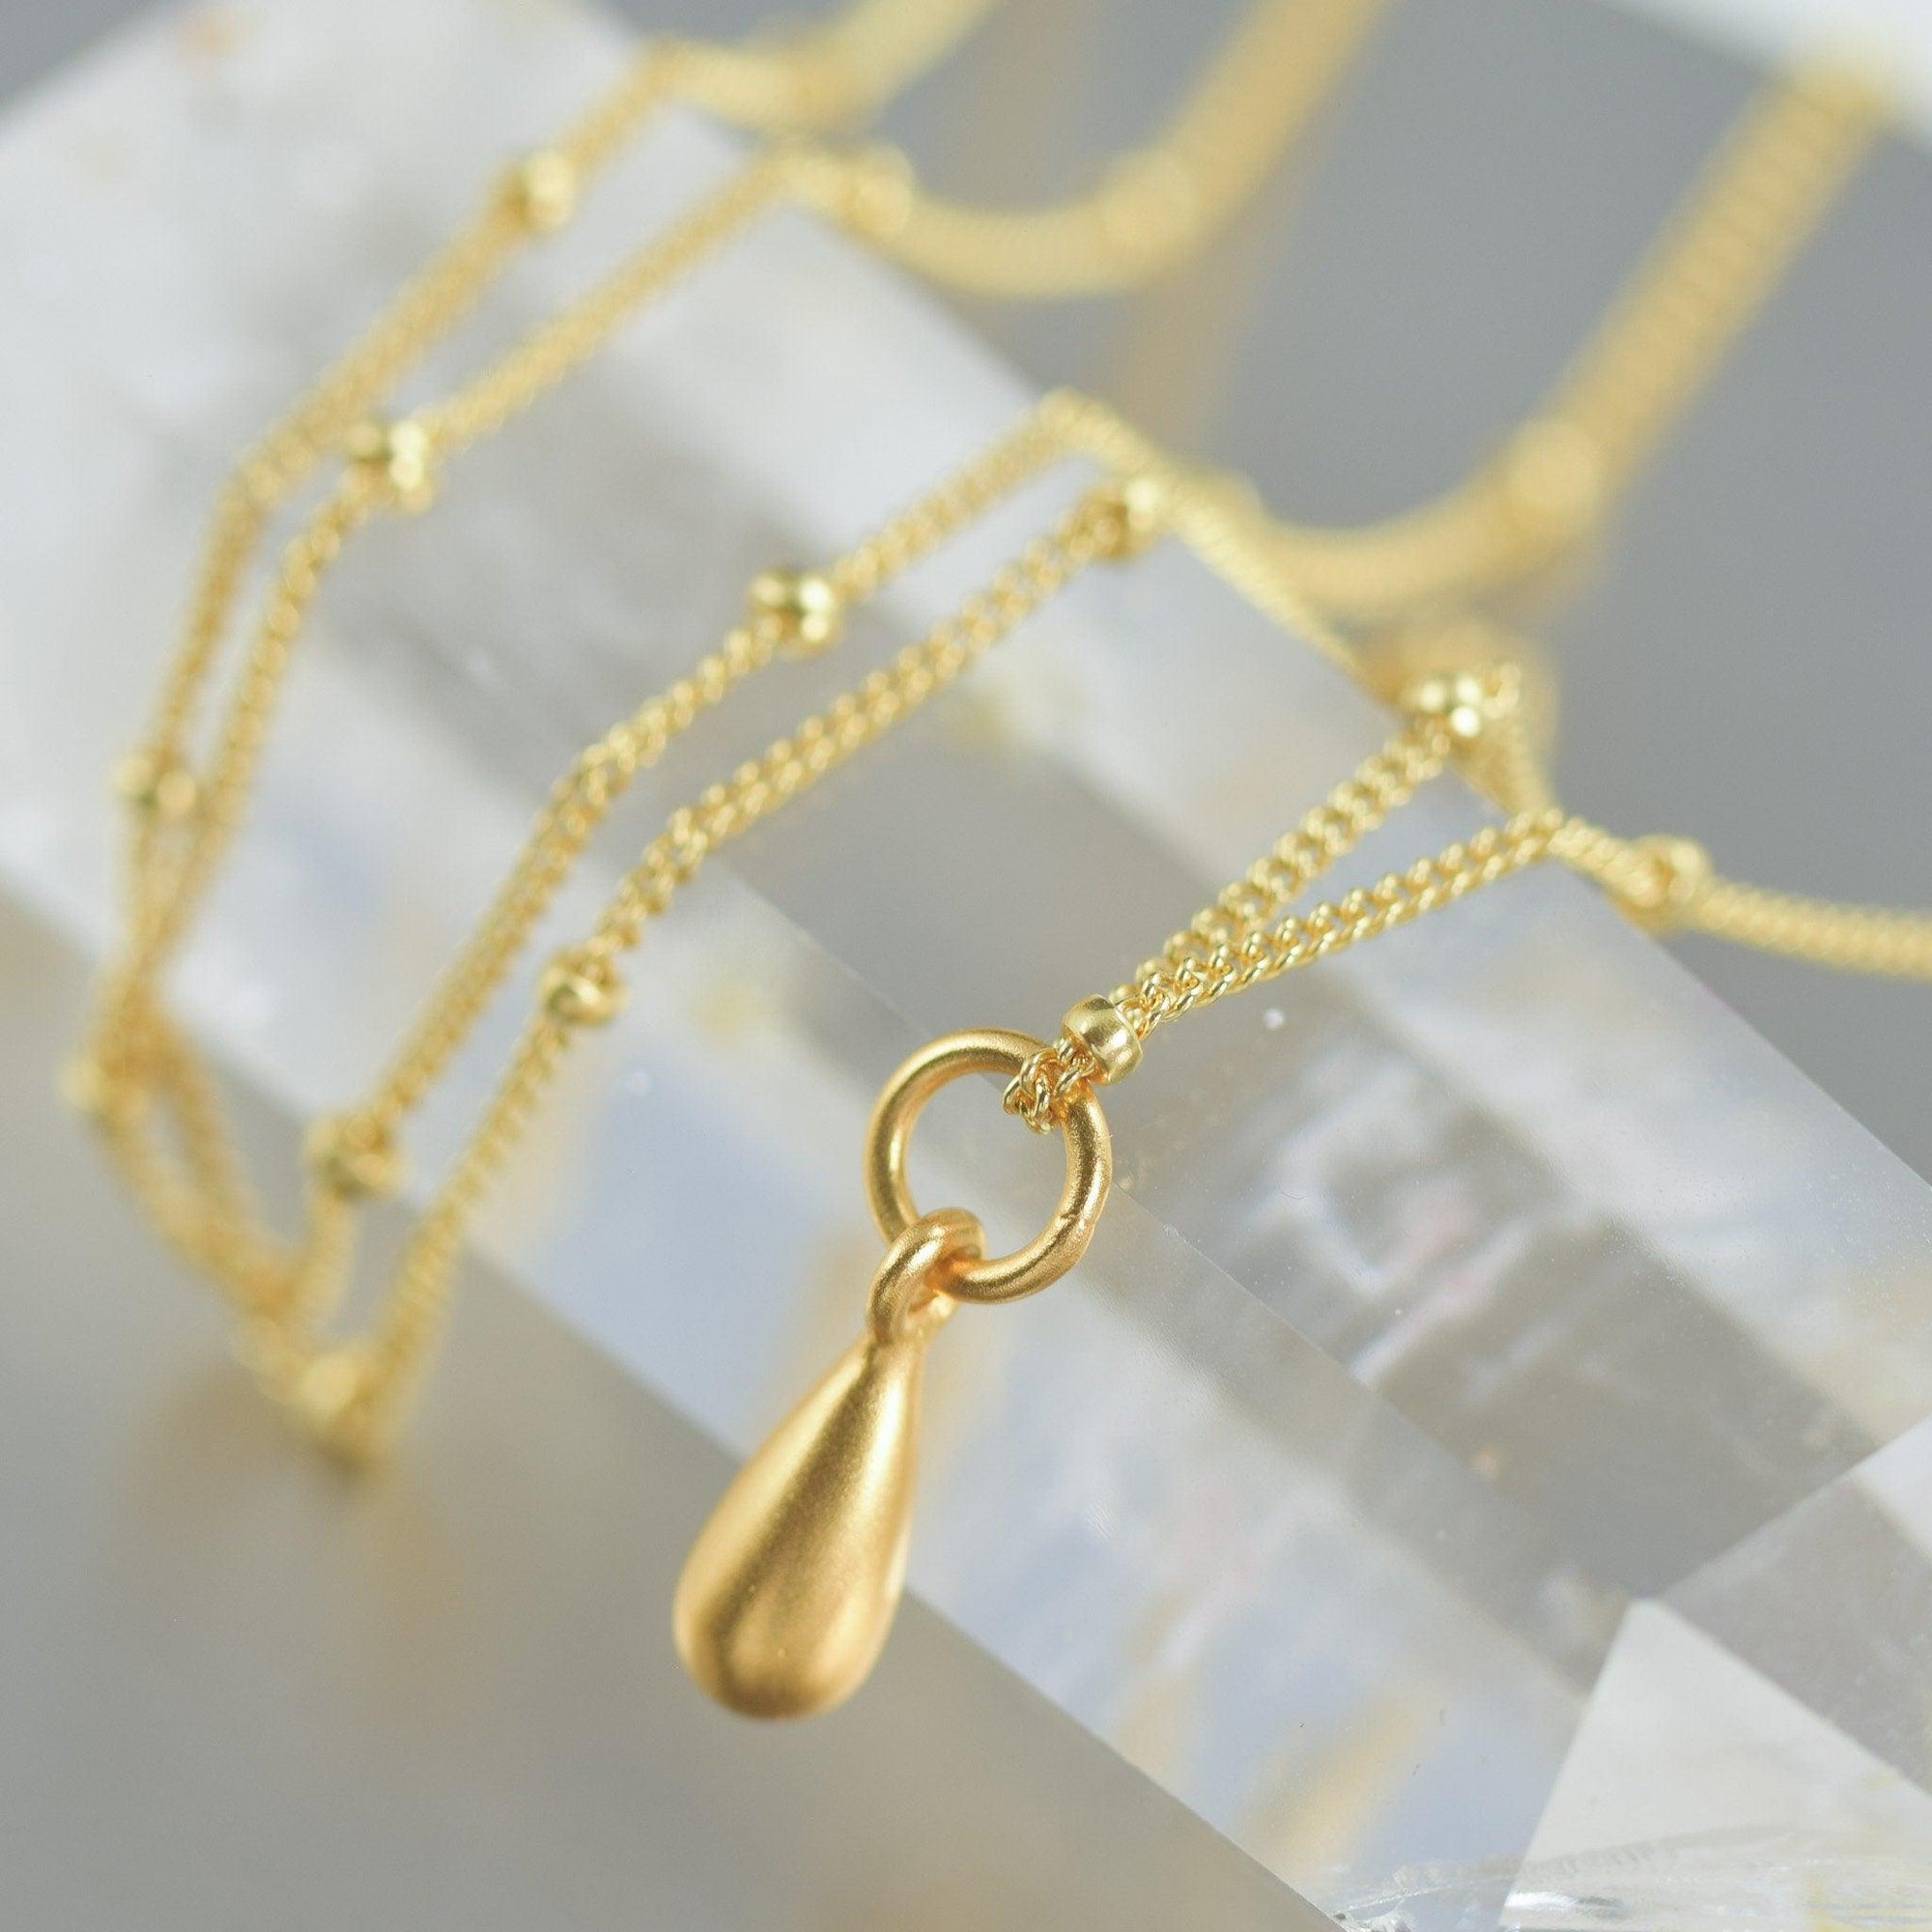 14K Gold vermeil teardrop necklace and / or earrings set, sold together or individually